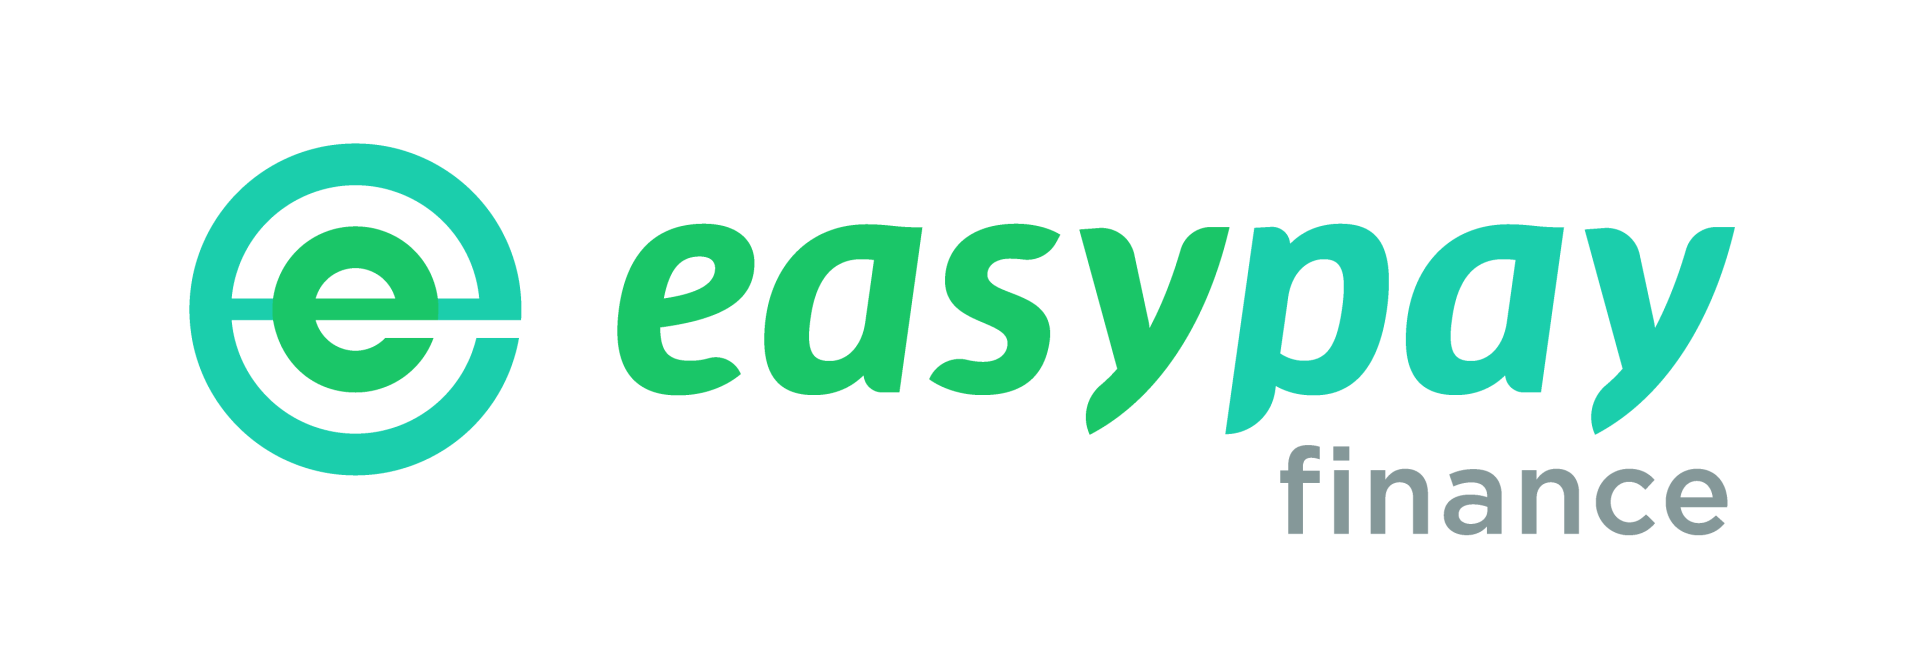 The easypay finance logo is green and white on a white background.